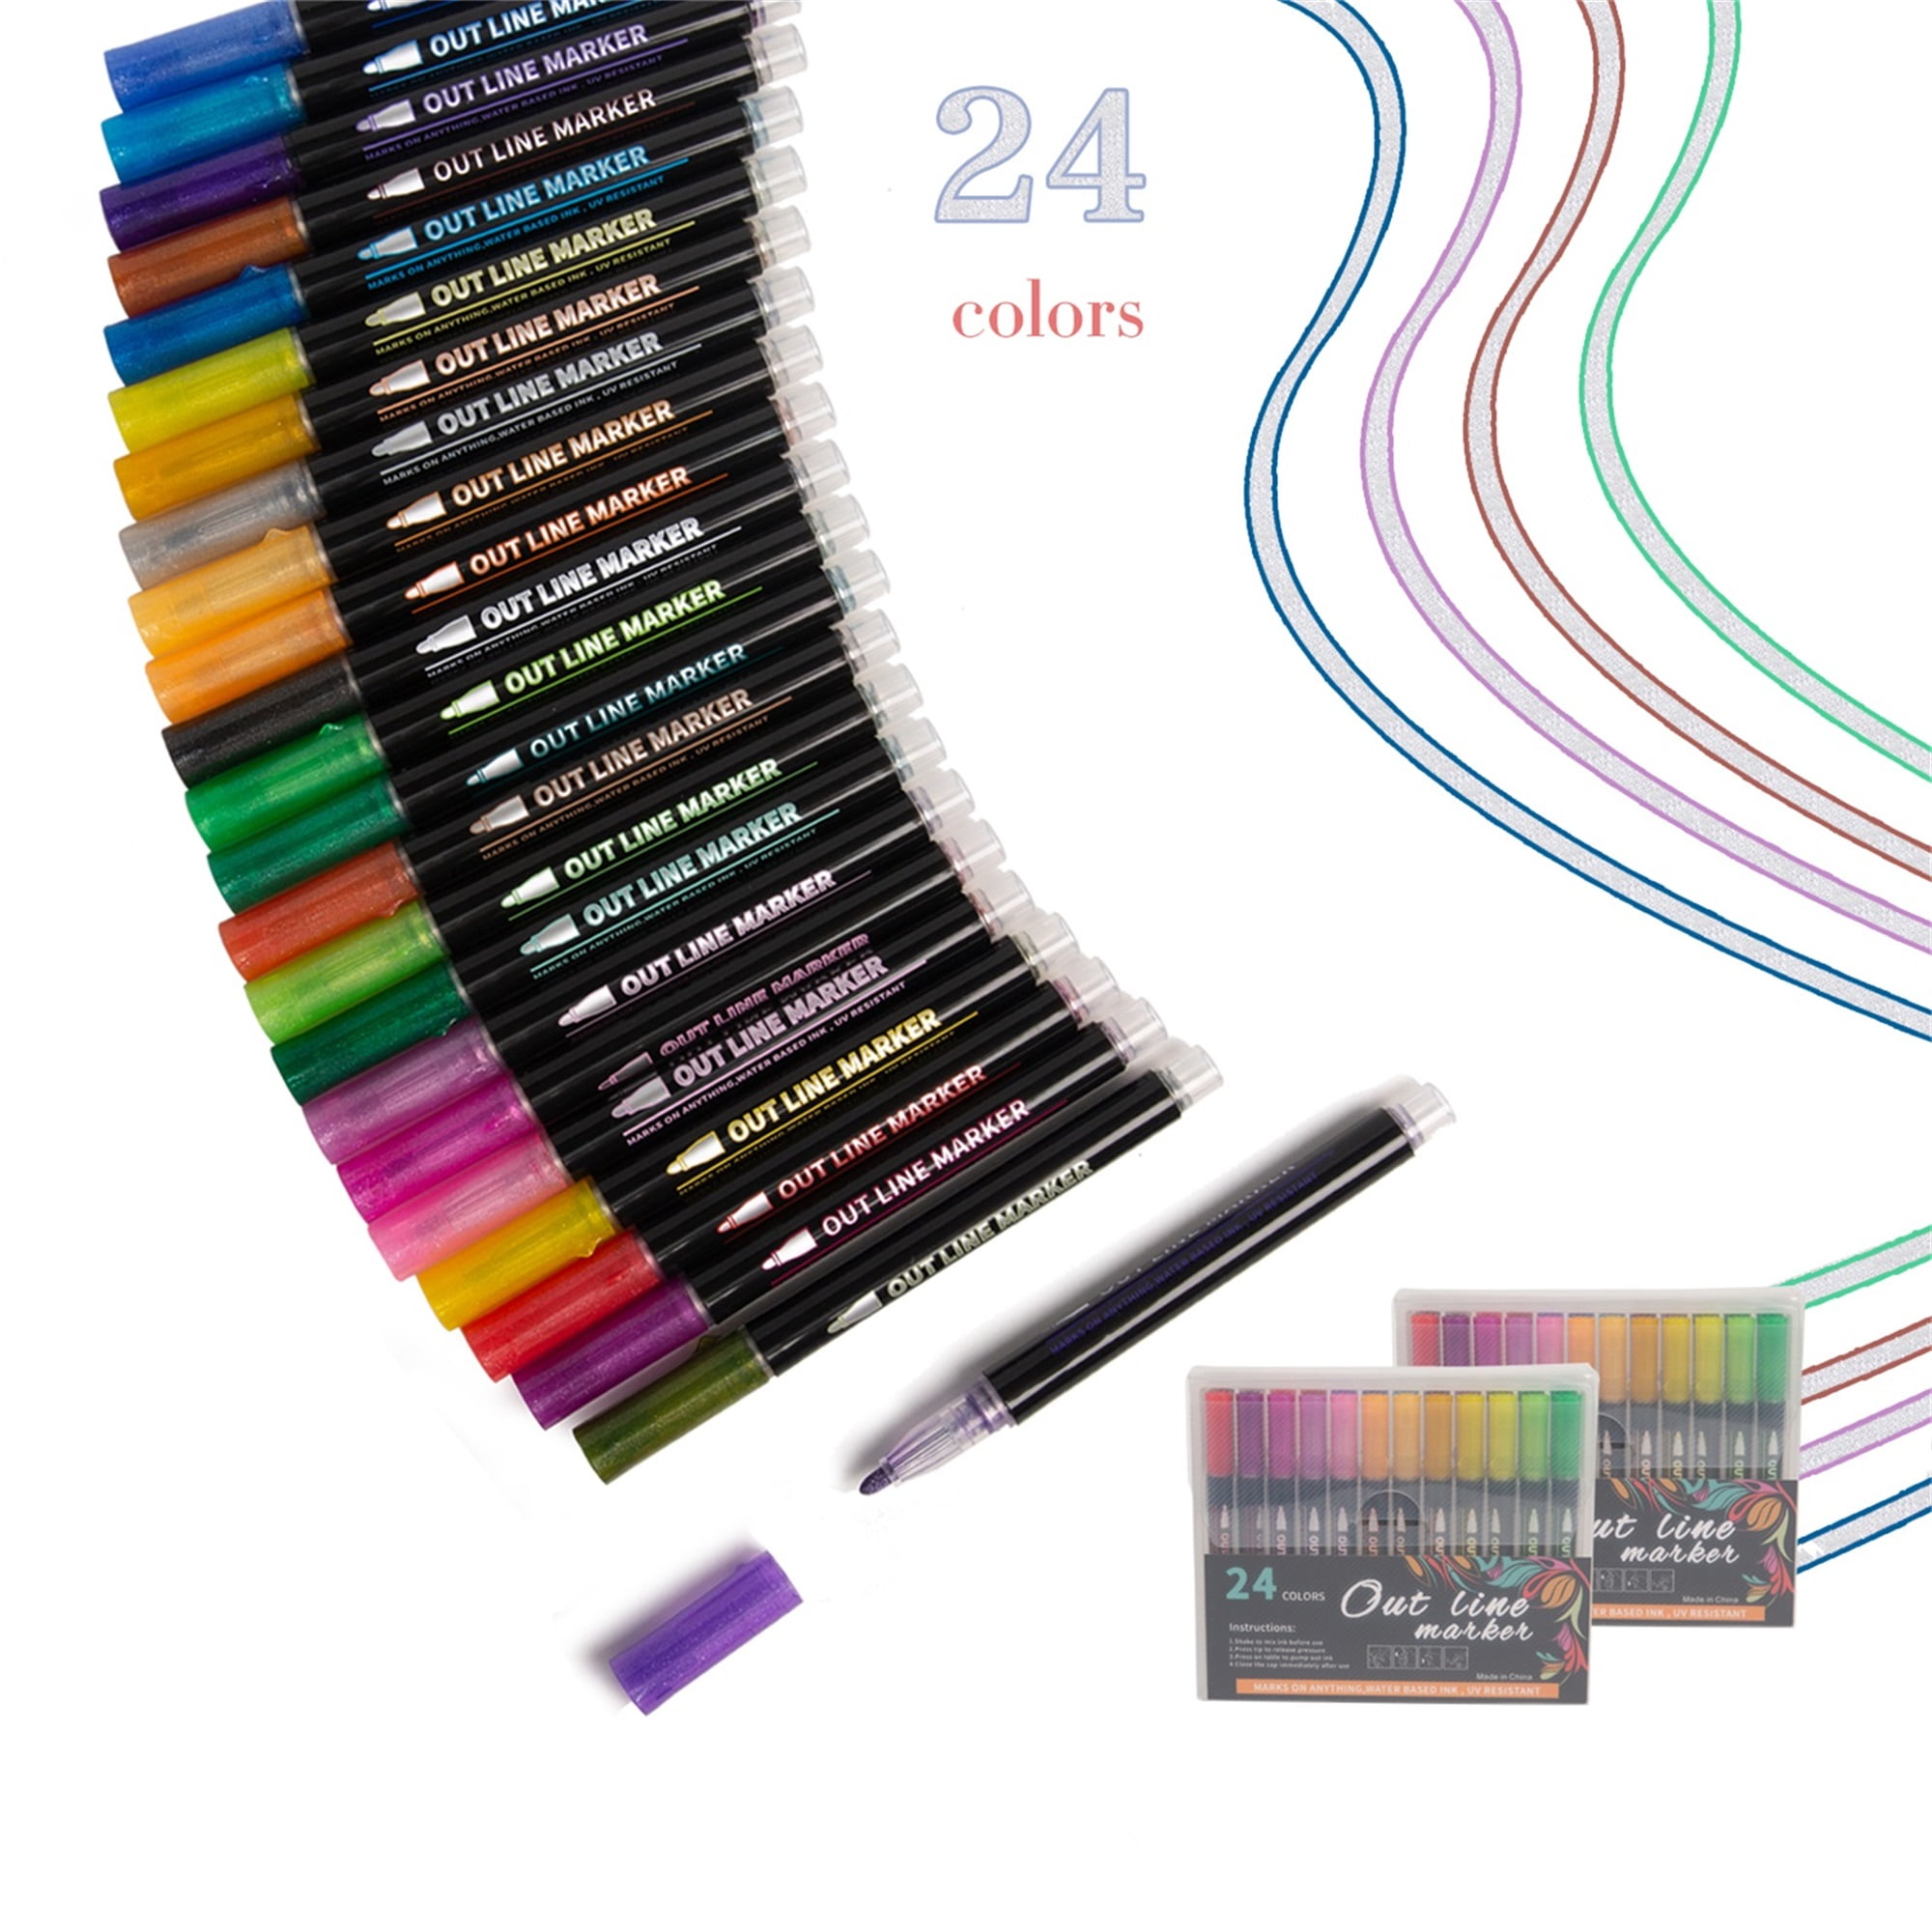 ALLZZY DoodleDazzles Shimmer Markers,Double Line Outliner Markers